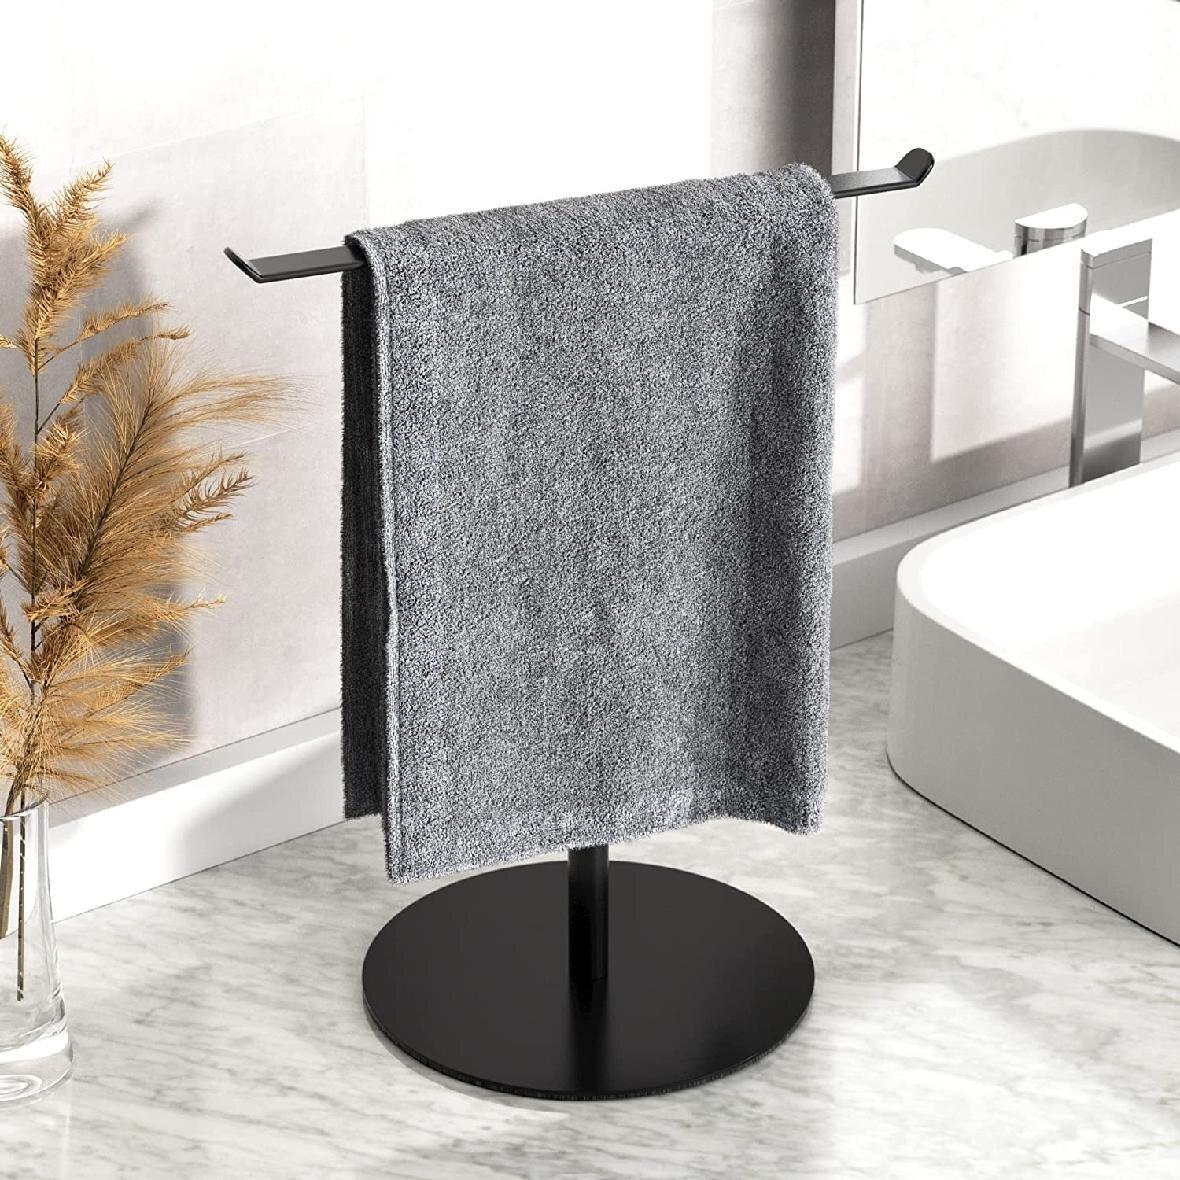 Matte Black Stand Towel Ring NearMoon T-Shape Hand Towel Holder-Bathroom Towel Rack-Stand with Balanced Base SUS304 Stainless Steel Towel Bar for Bathroom Kitchen Vanity Countertop